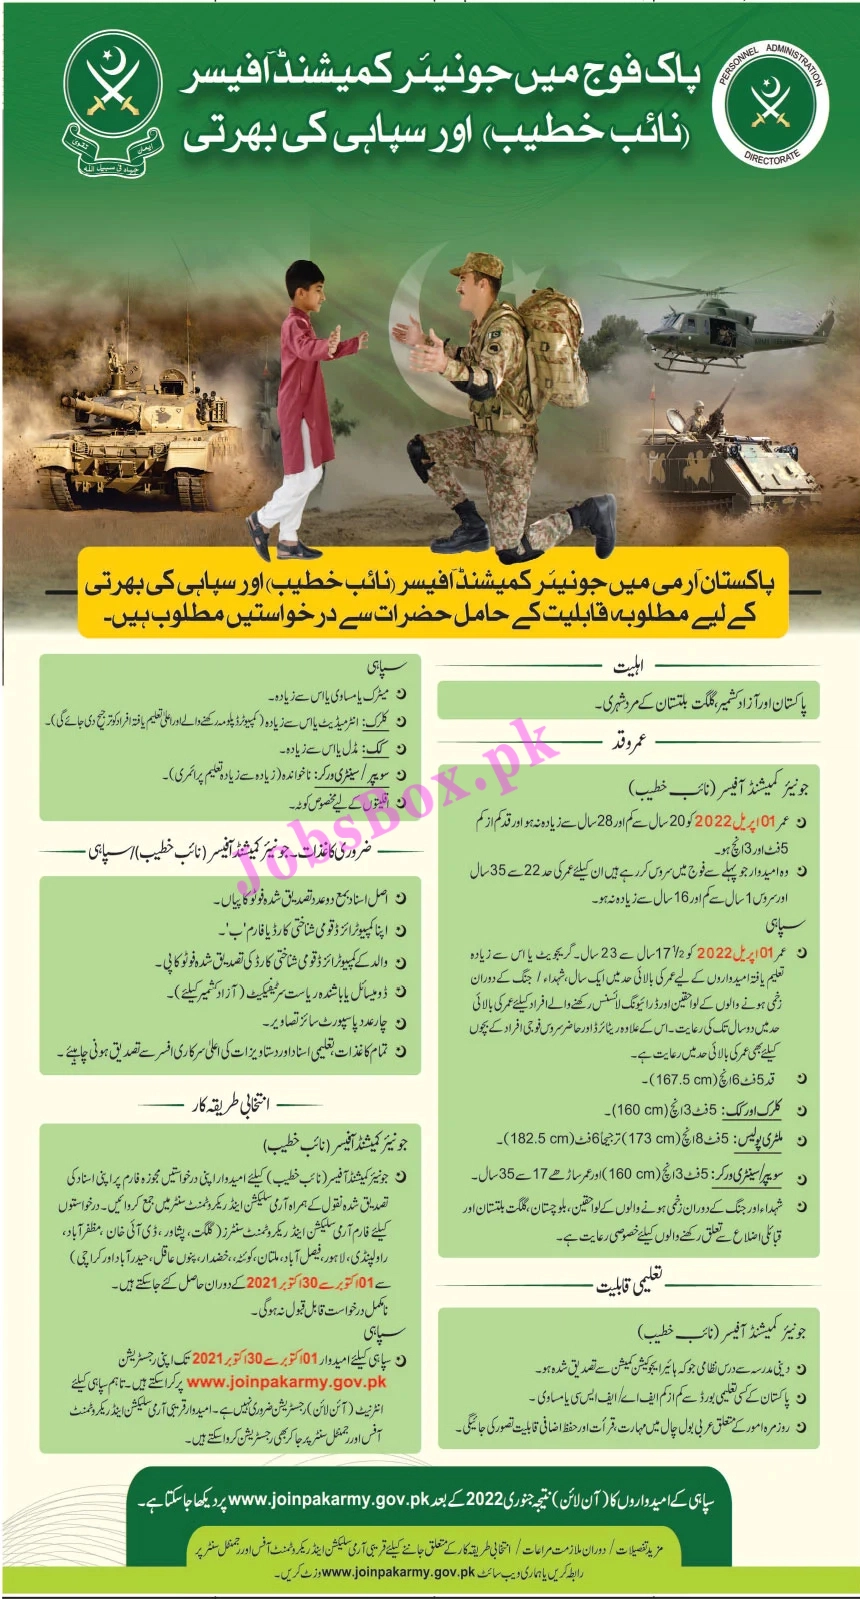 Join Pak Army Jobs 2021 - Online Registration - Apply